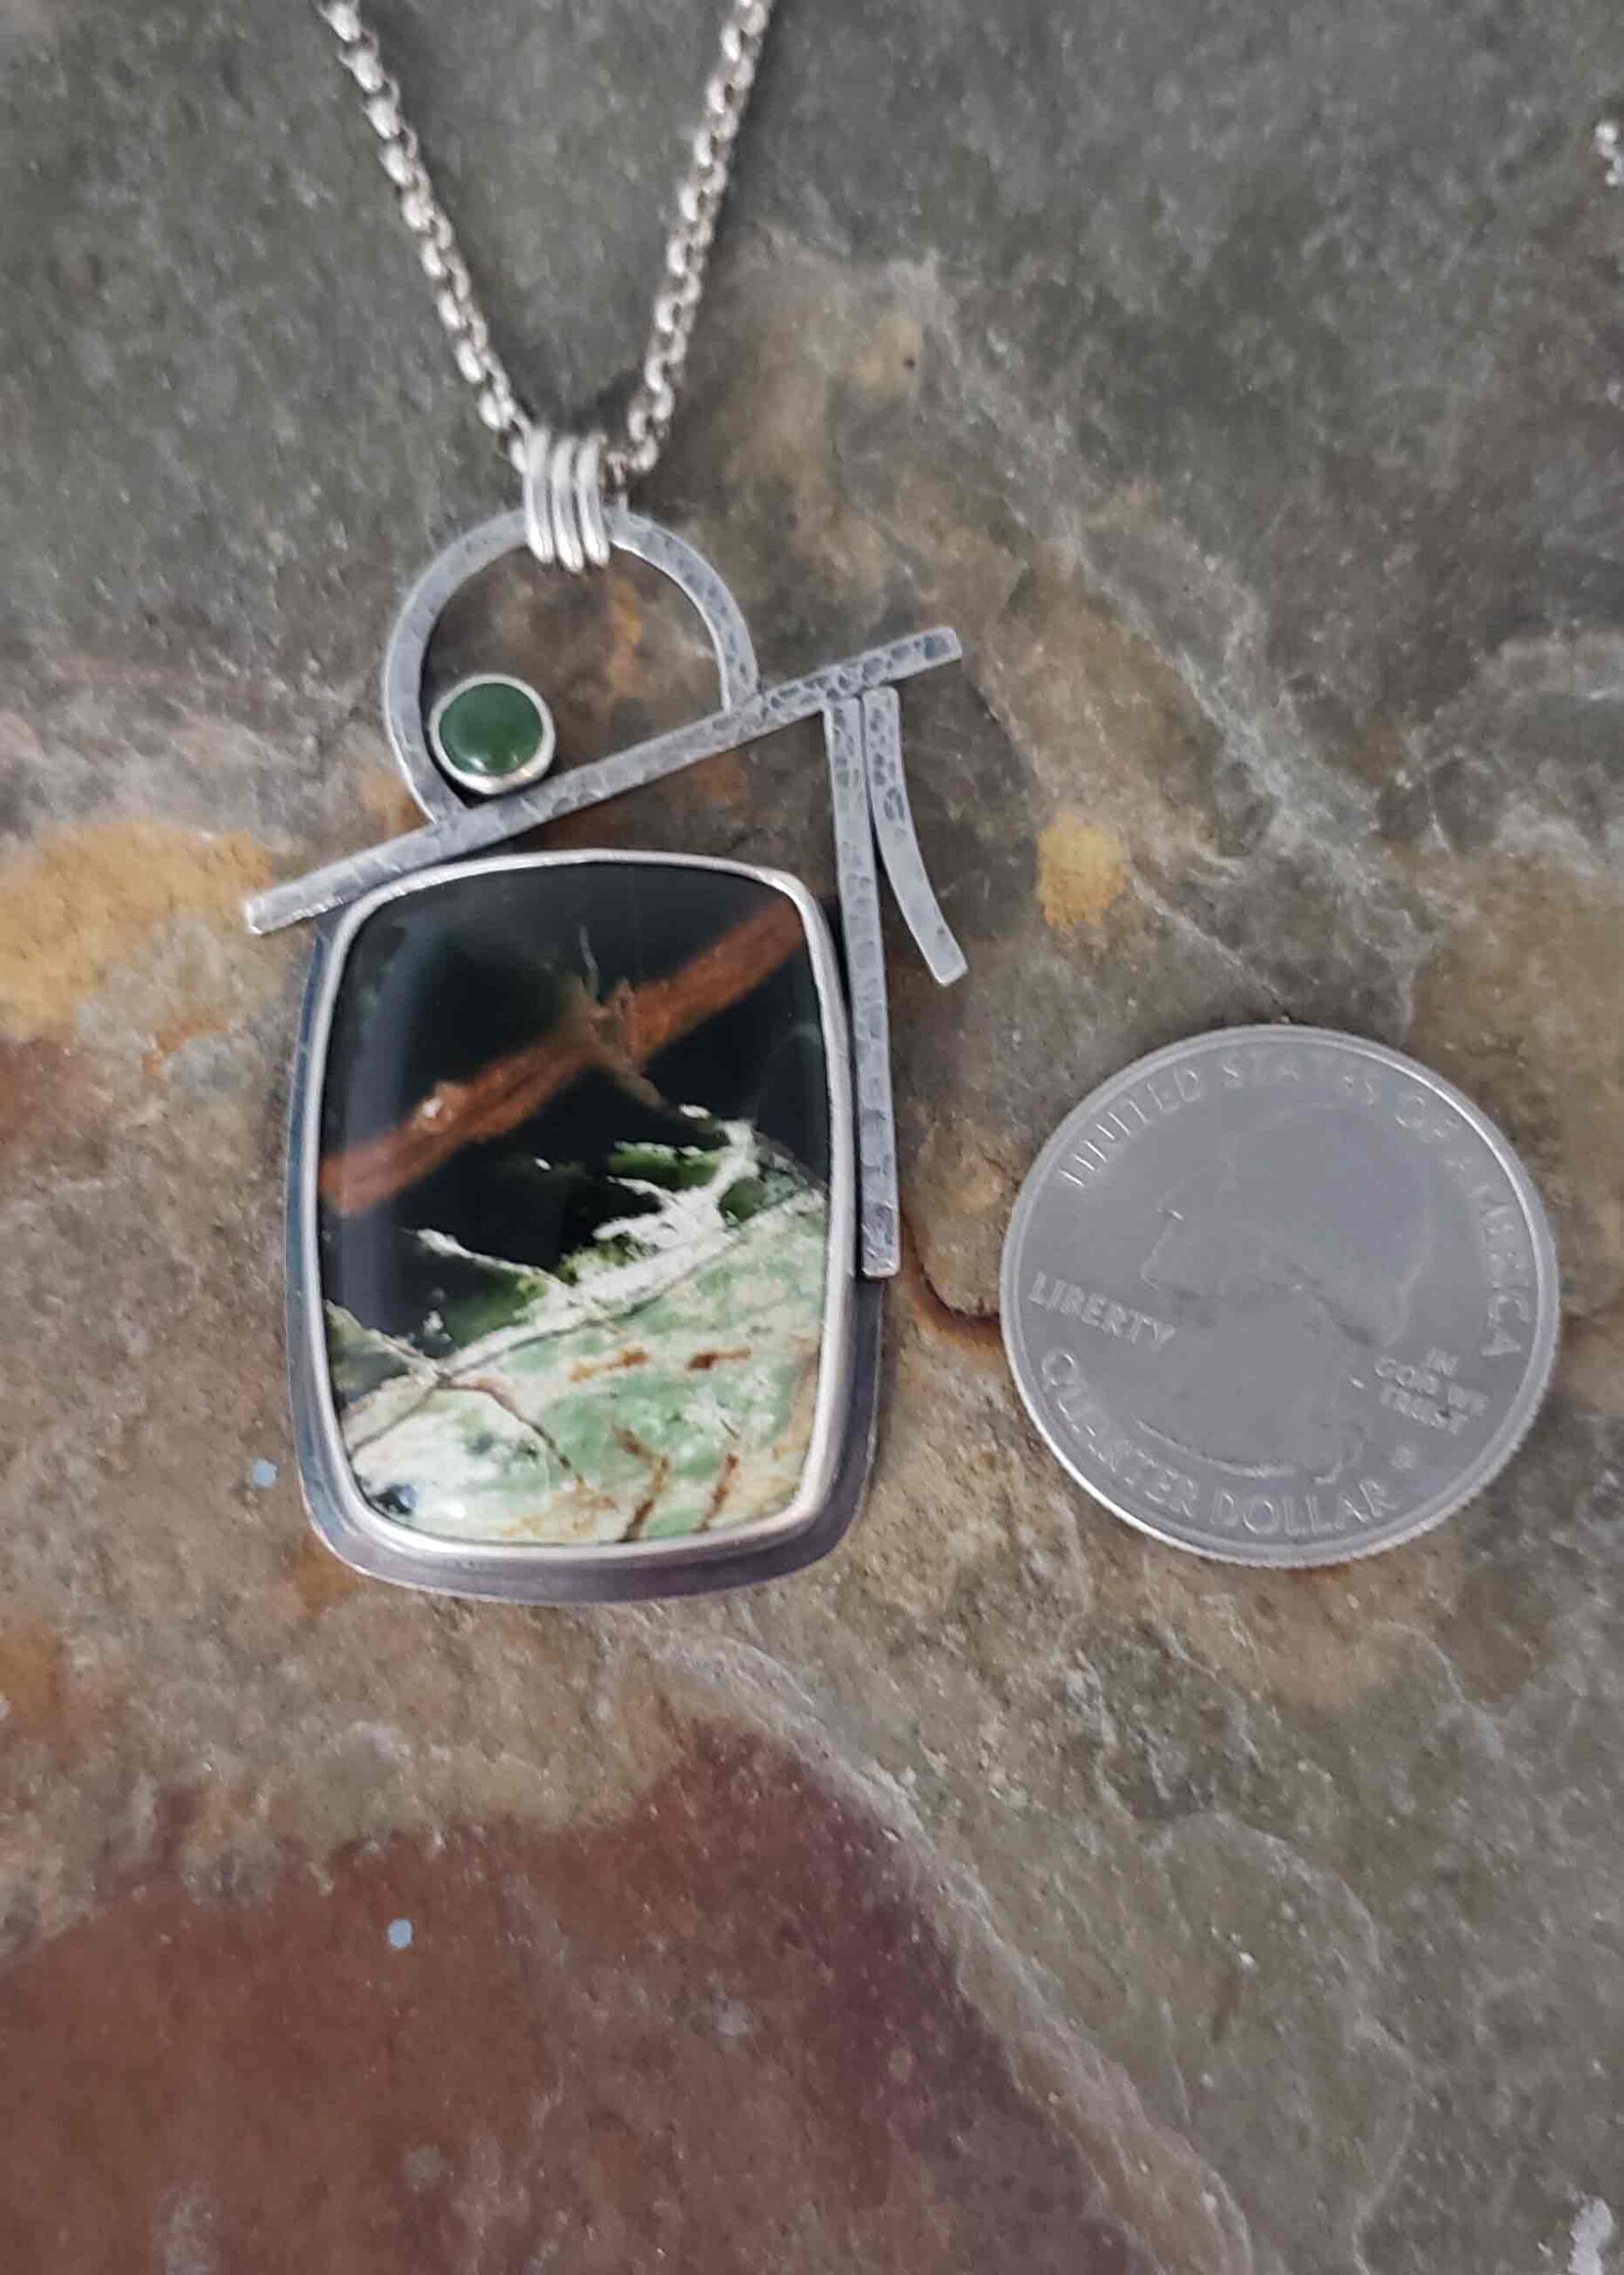 greens and rusts in this Chrome Diopside and Jade pendant in Sterling Silver